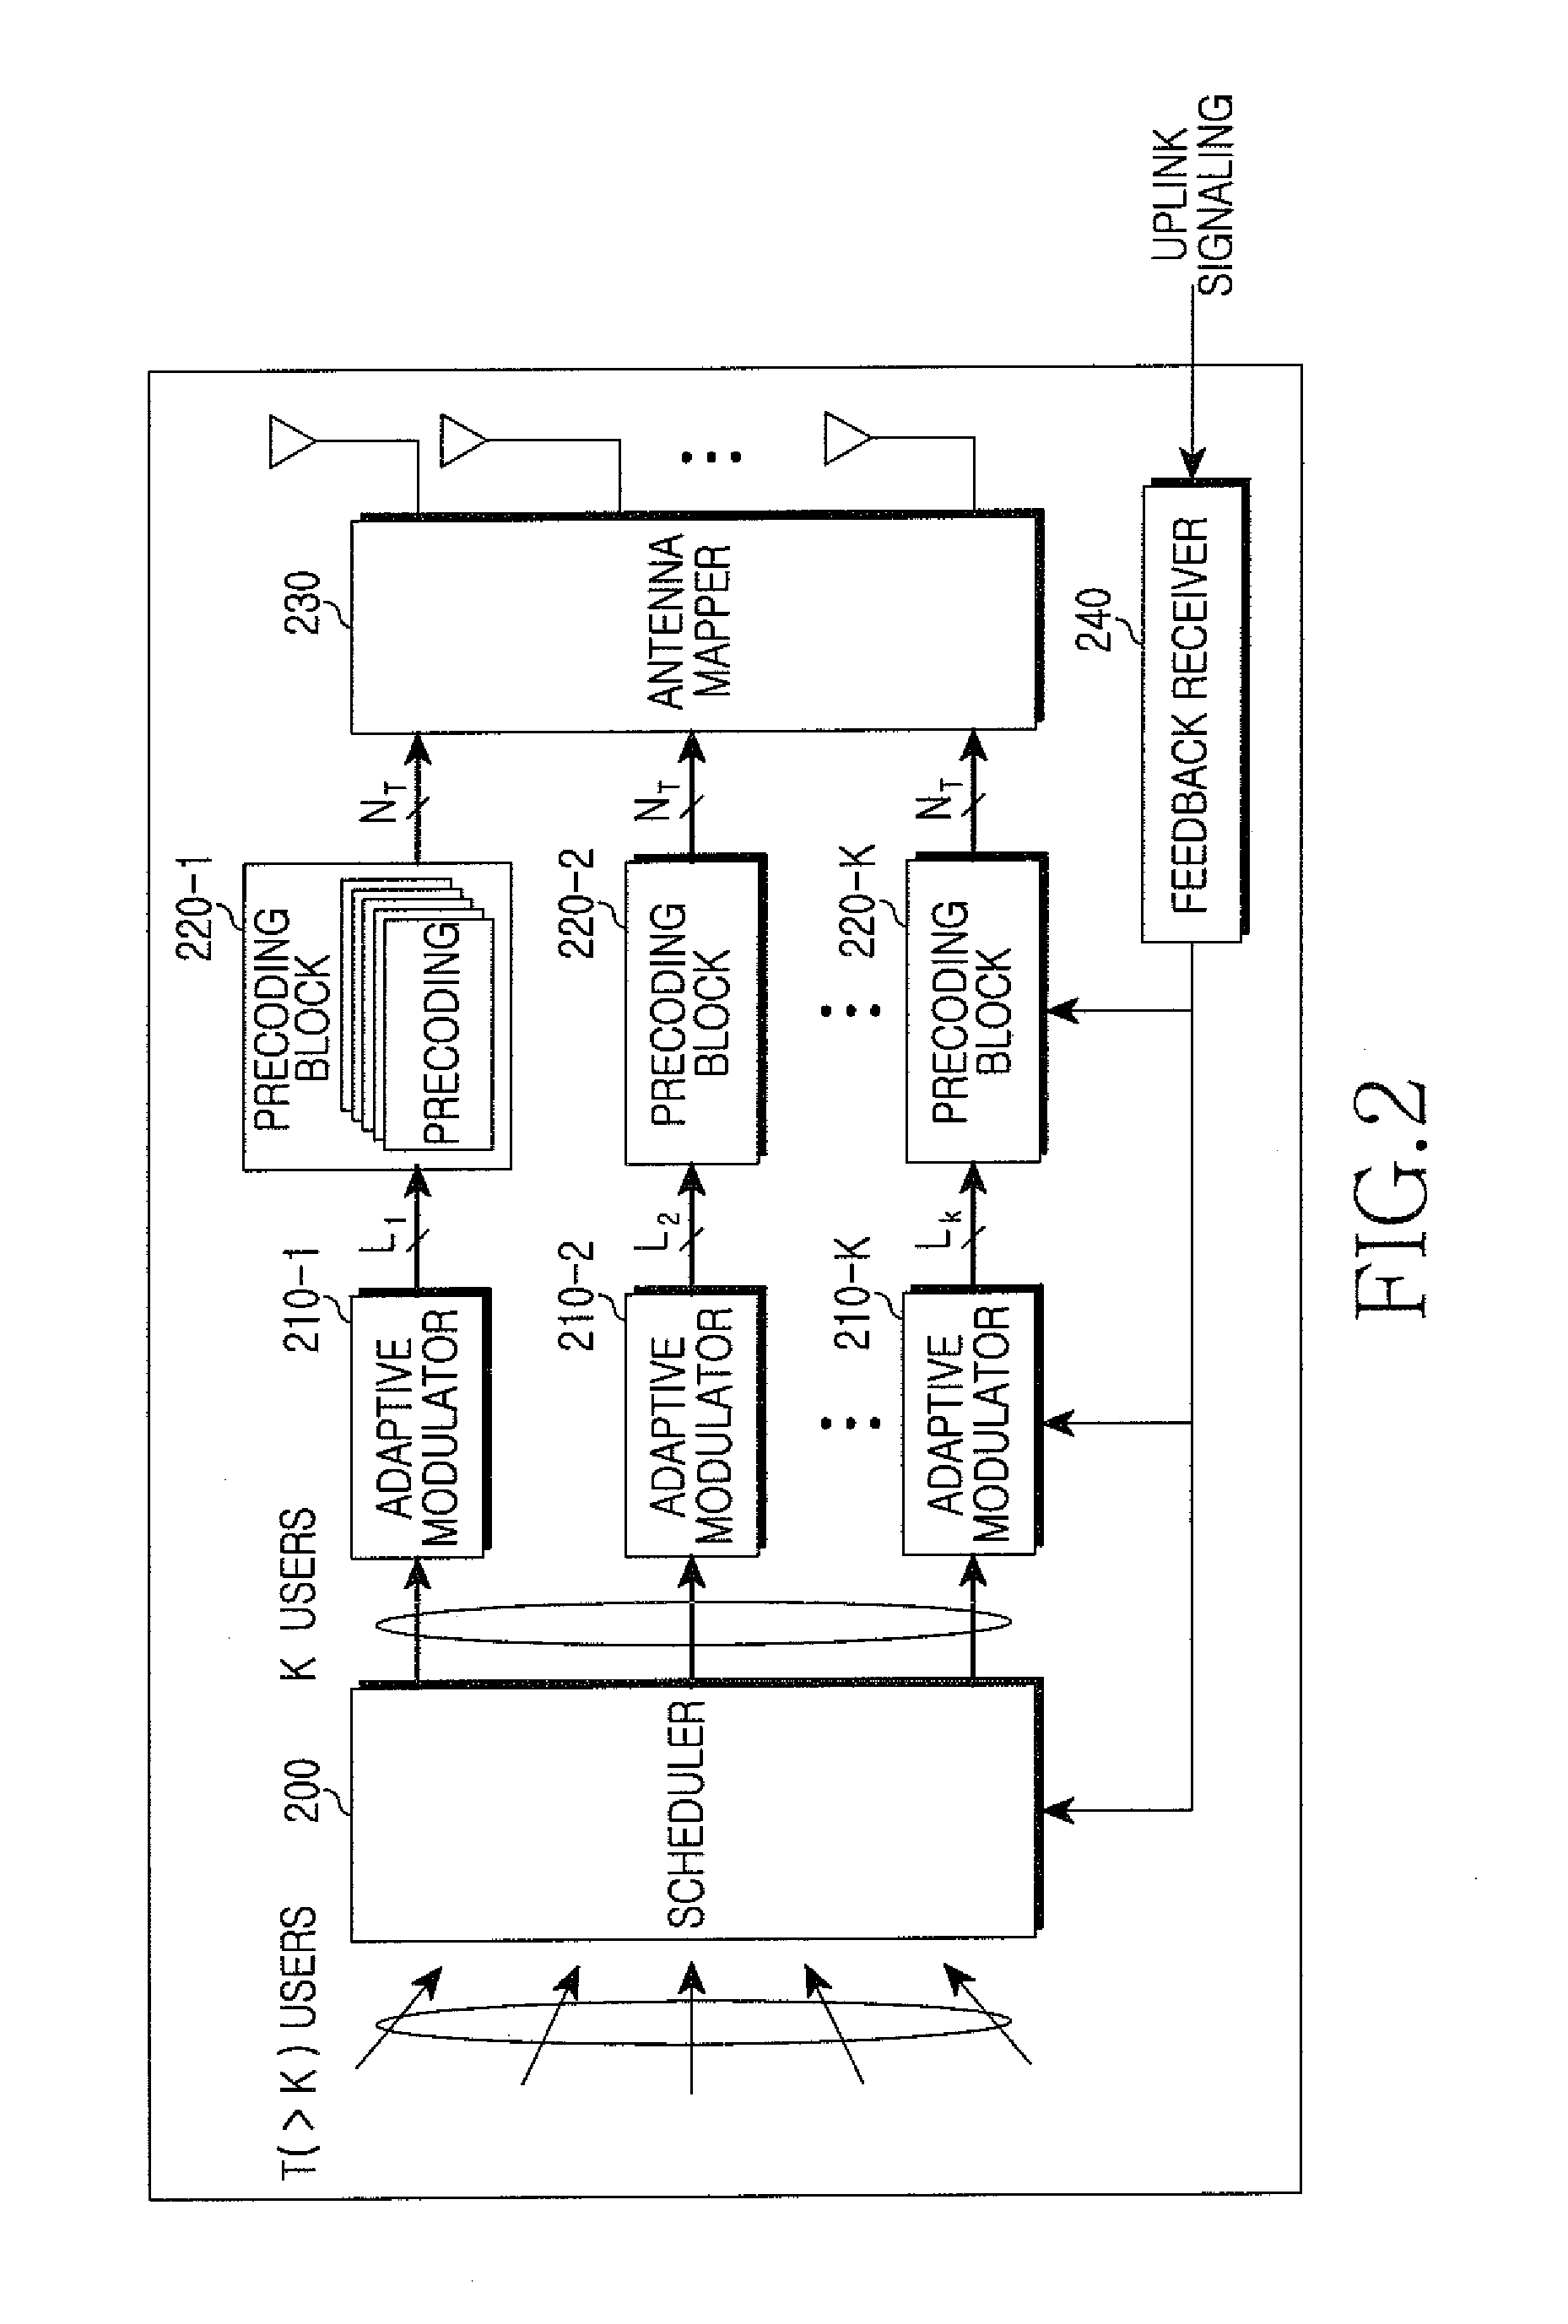 Precoder and precoding method in a multi-antenna system